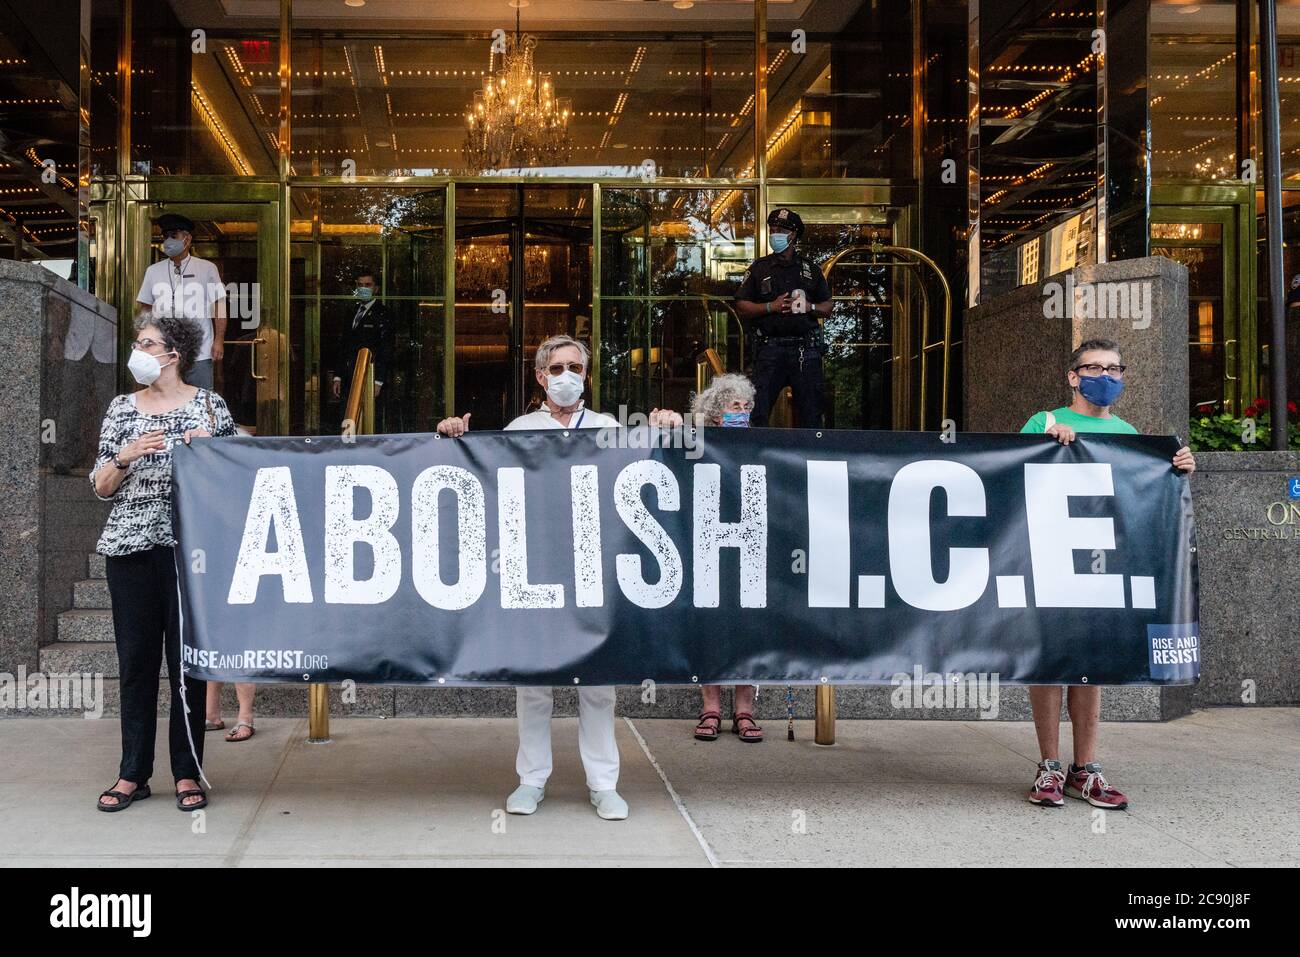 Rise and Resist activists attend a vigil in support of Black Lives Matter and protesting Trump's policies outside Trump International Hotel and Tower in New York City on July 27, 2020. (Photo by Gabriele Holtermann/Sipa USA) Credit: Sipa USA/Alamy Live News Stock Photo